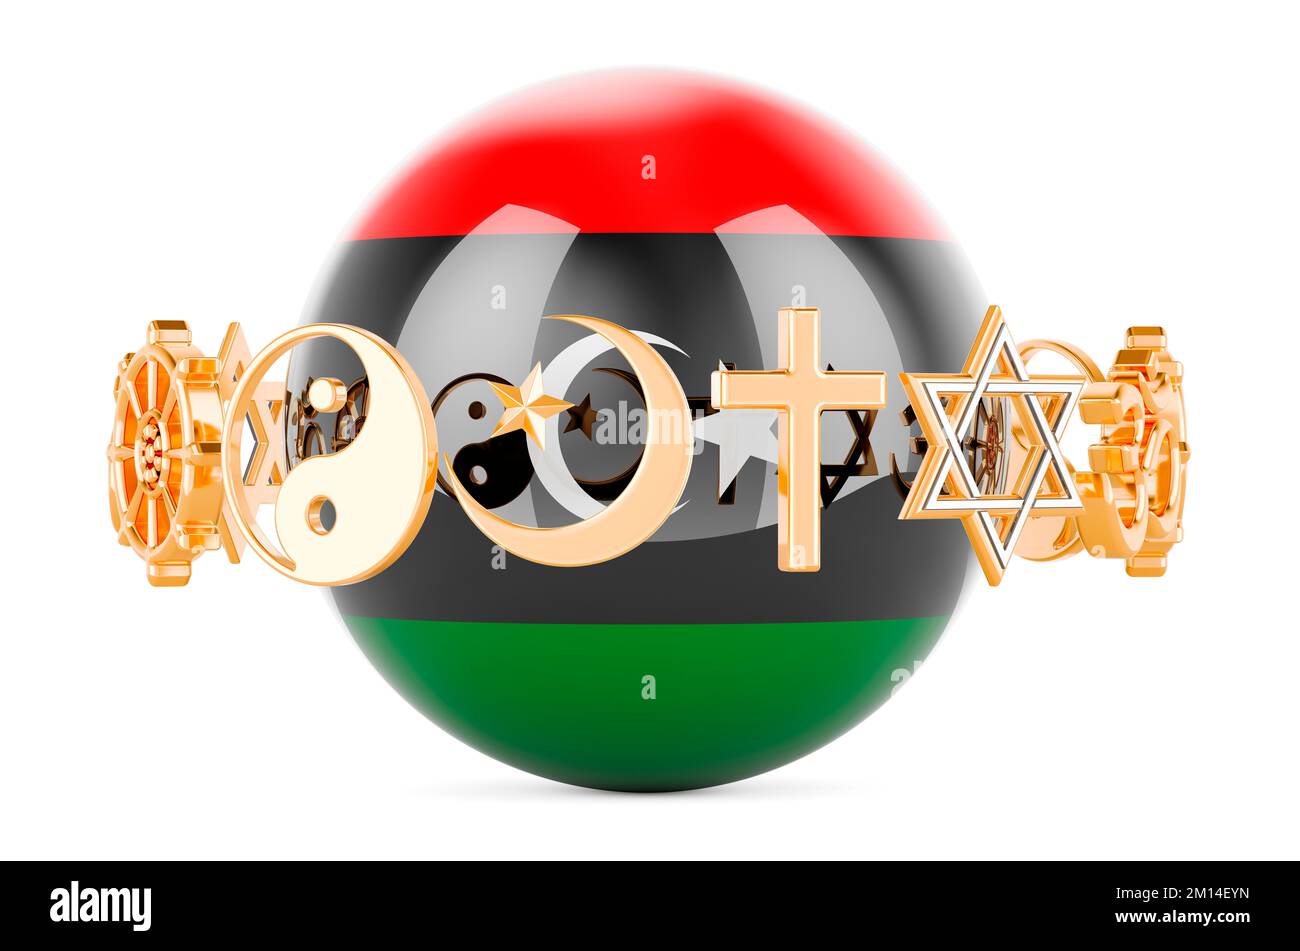 Libyan flag painted on sphere with religions symbols around, 3D rendering isolated on white background Stock Photo